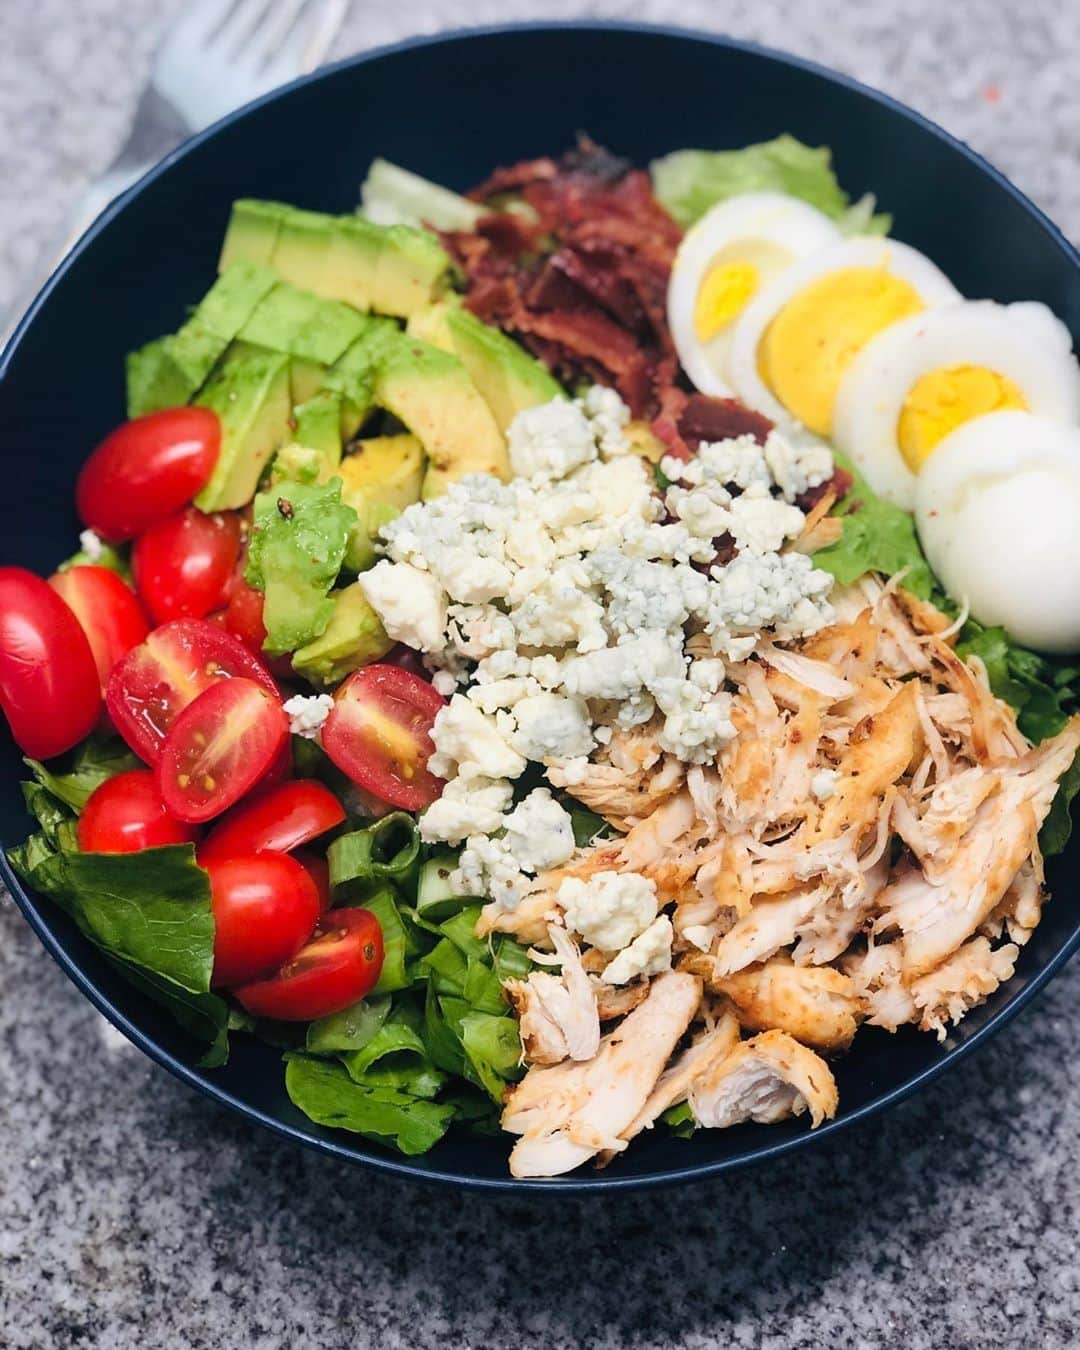 Flavorgod Seasoningsさんのインスタグラム写真 - (Flavorgod SeasoningsInstagram)「Flavor God Seasoned Fresh Cobb Salad!⁠ -⁠ Customer:👉 @melwade60⁠ Seasoned with:👉 #Flavorgod Himalayan Salt & Pink Peppercorn Seasoning .⁠ -⁠ Add delicious flavors to your meals!⬇️⁠ Click link in the bio -> @flavorgod  www.flavorgod.com⁠ -⁠ 🍗 Grilled chicken breast or roasted chickpeas (seasoned with @flavorgod Bacon Lovers Seasoning).⁠ 🥓 Crispy bacon, crumbled (optional)⁠ 🍅 Grape tomatoes, sliced⁠ 🥬 1 large head romaine lettuce, chopped⁠ 🥑 Avocado, sliced.⁠ 🧅 Green onions, sliced⁠ 🥚 Boiled egg, sliced⁠ 🧀 Blue cheese crumbles⁠ Topped with blue cheese dressing and Flavorgod Himalayan Salt & Pink Peppercorn Seasoning .⁠ -⁠ Flavor God Seasonings are:⁠ 💥ZERO CALORIES PER SERVING⁠ 🔥0 SUGAR PER SERVING ⁠ 💥GLUTEN FREE⁠ 🔥KETO FRIENDLY⁠ 💥PALEO FRIENDLY⁠ -⁠ #food #foodie #flavorgod #seasonings #glutenfree #mealprep #seasonings #breakfast #lunch #dinner #yummy #delicious #foodporn」7月24日 8時01分 - flavorgod